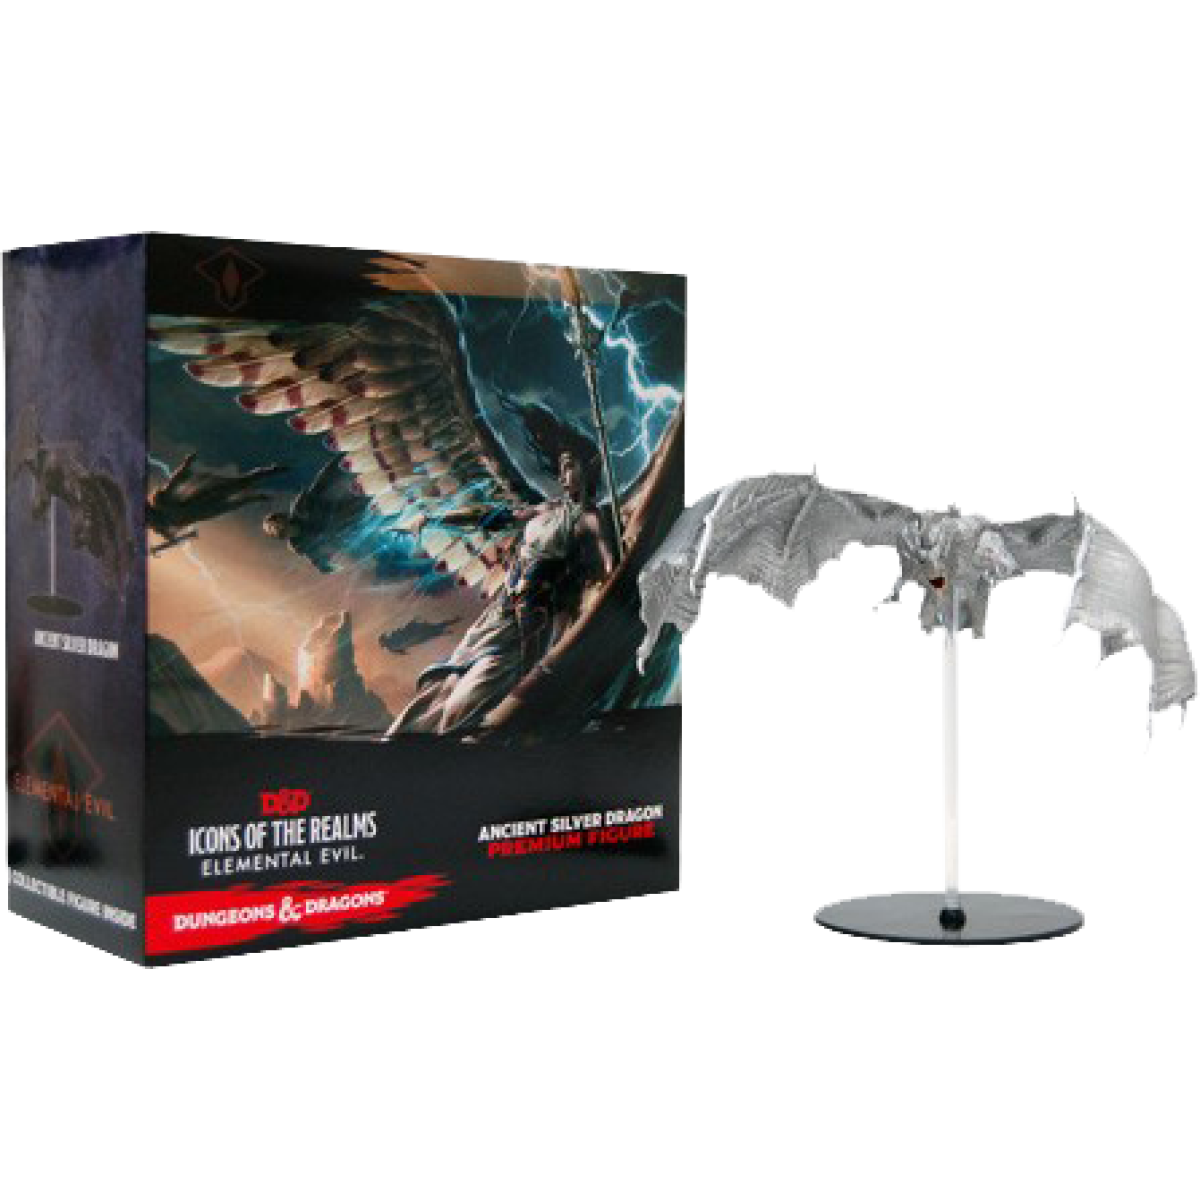 Dungeons and Dragons - Icons Of The Realms Elemental Evil Ancient Silver Dragon Premium Figure